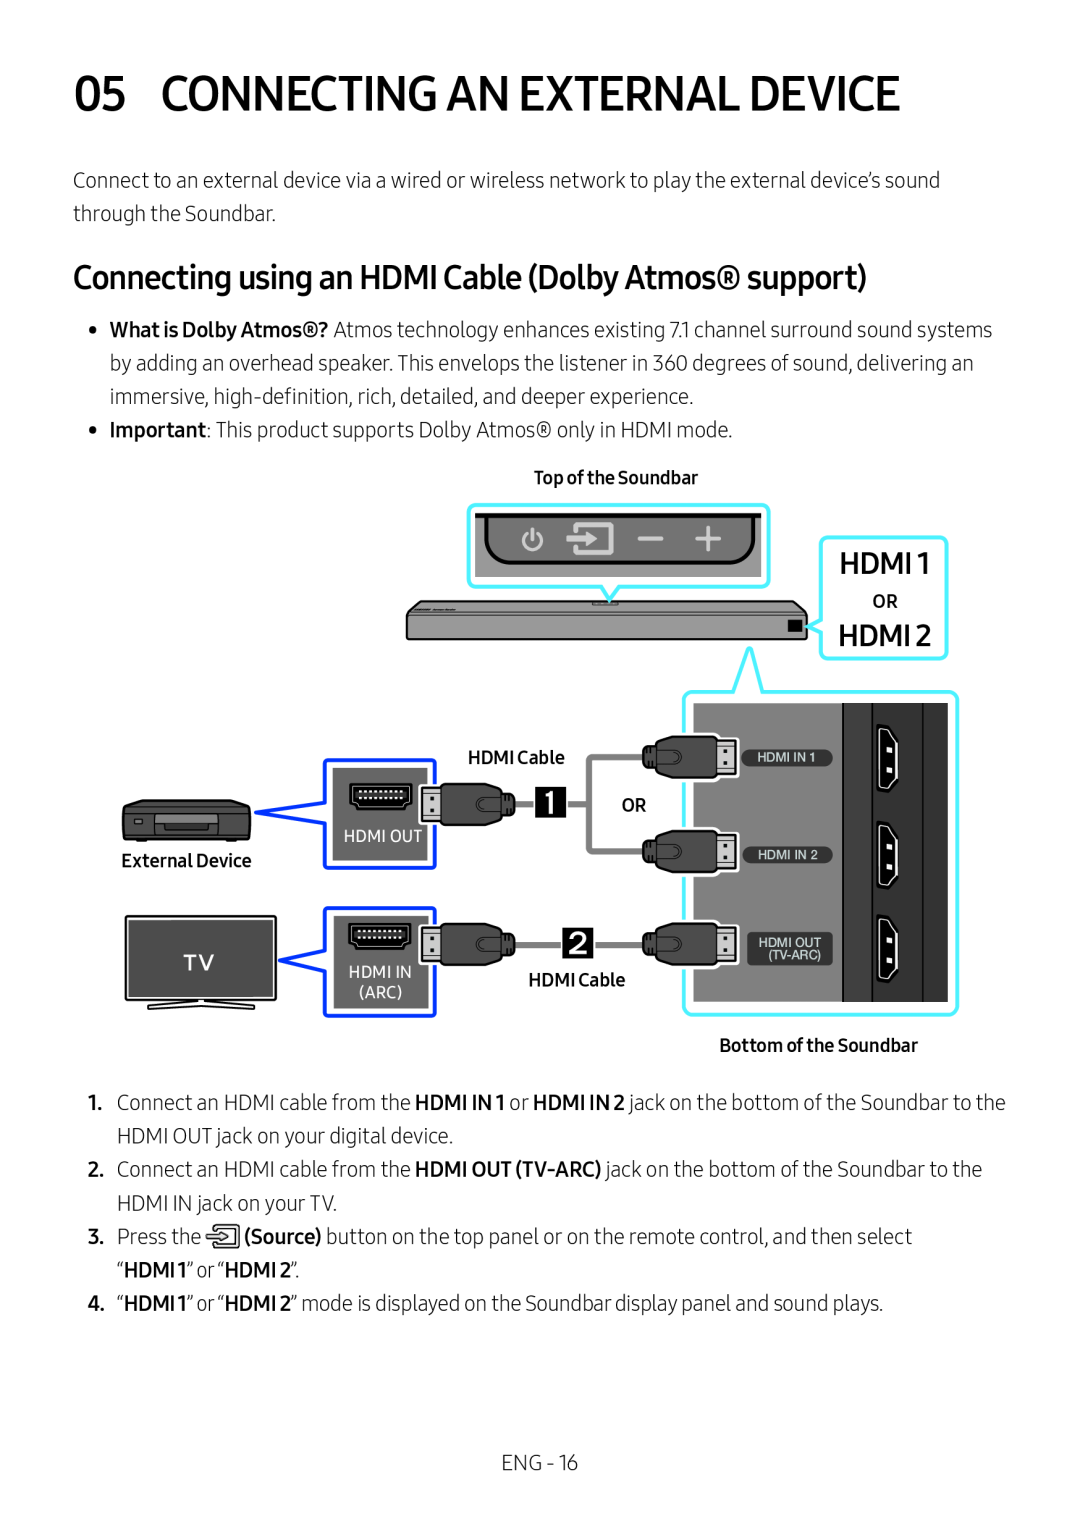 Connecting using an HDMI Cable (Dolby Atmos® support) Dolby Atmos HW-N850